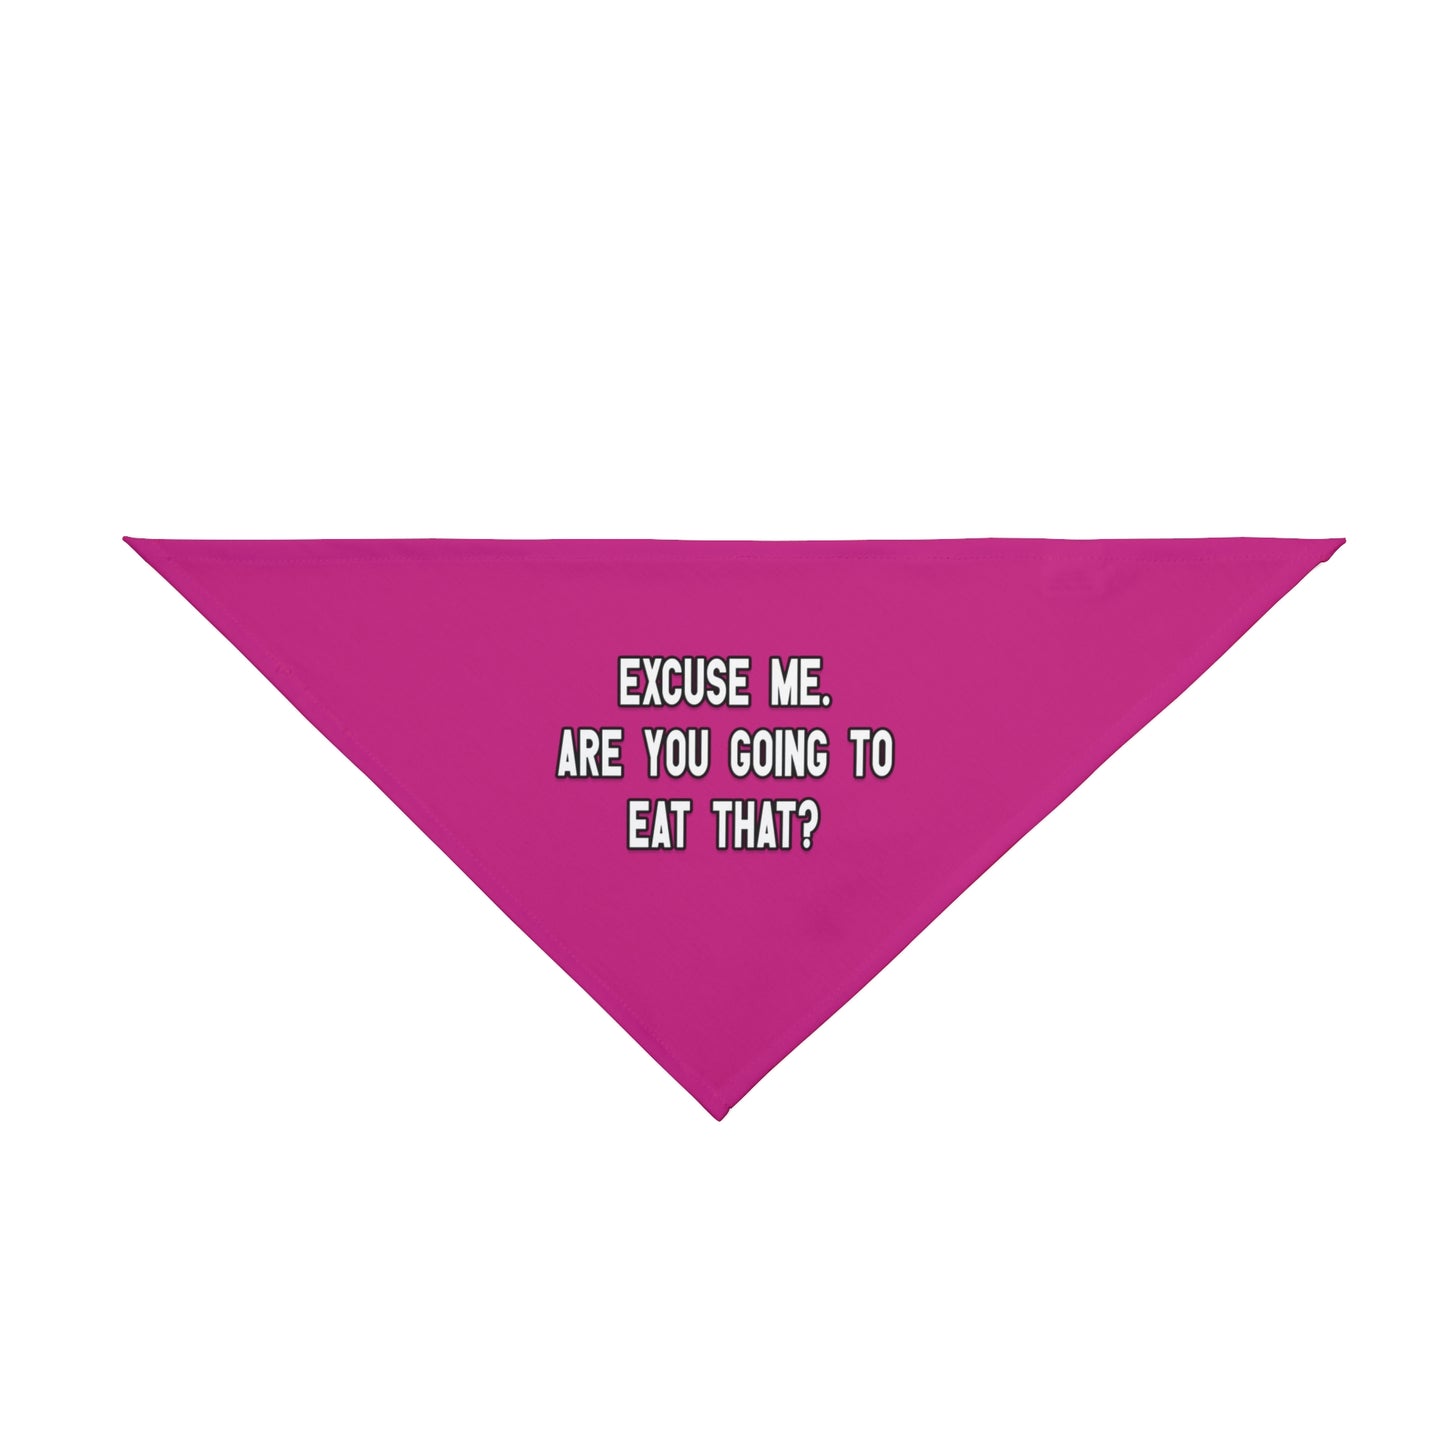 A bandana with the message: EXCUSE ME. ARE YOU GOING TO EAT THAT?. Bandana's Color is pink